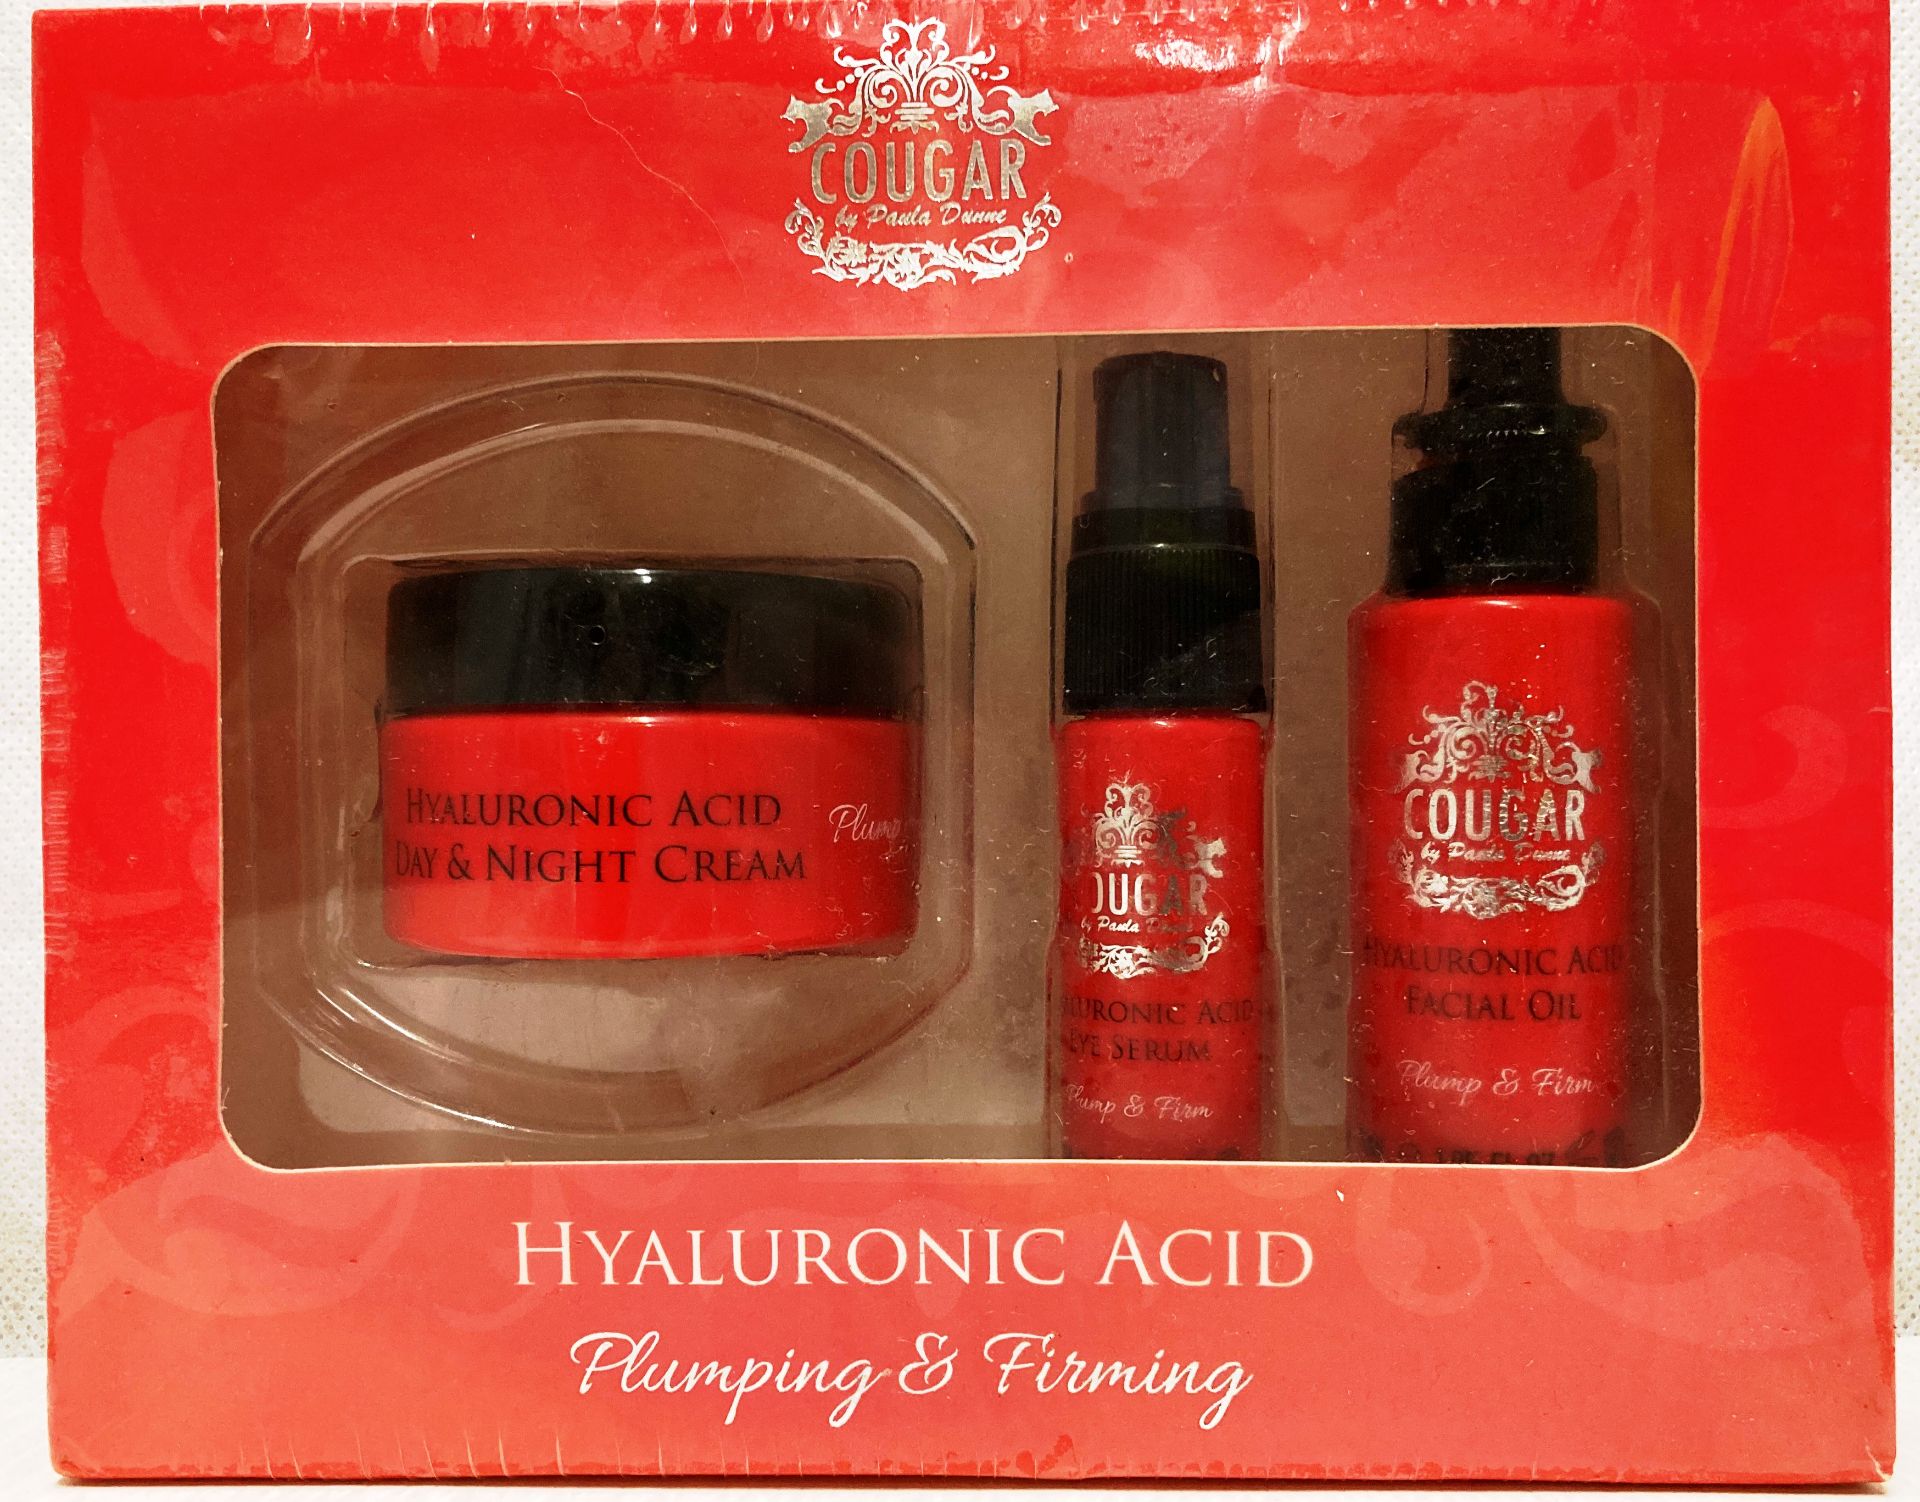 8 x Cougar Hyaluronic Acid Plumping and Firming sets